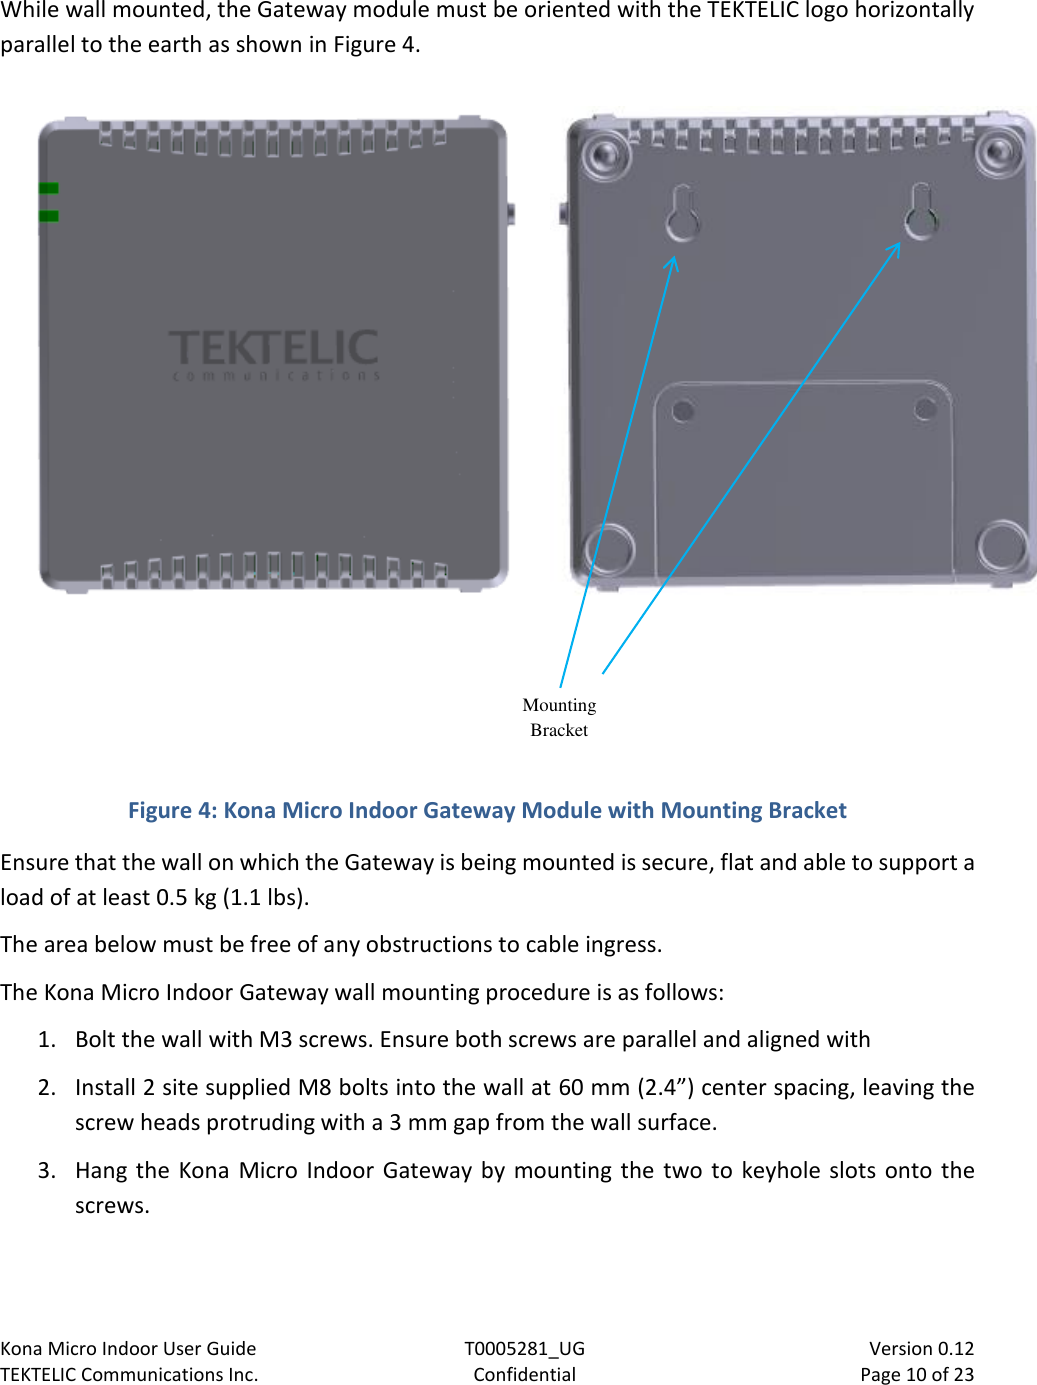 Page 10 of TEKTELIC Communications orporated T0005281 Kona micro outdoor gateway is a LoRa base station User Manual 2150 RRH SDS